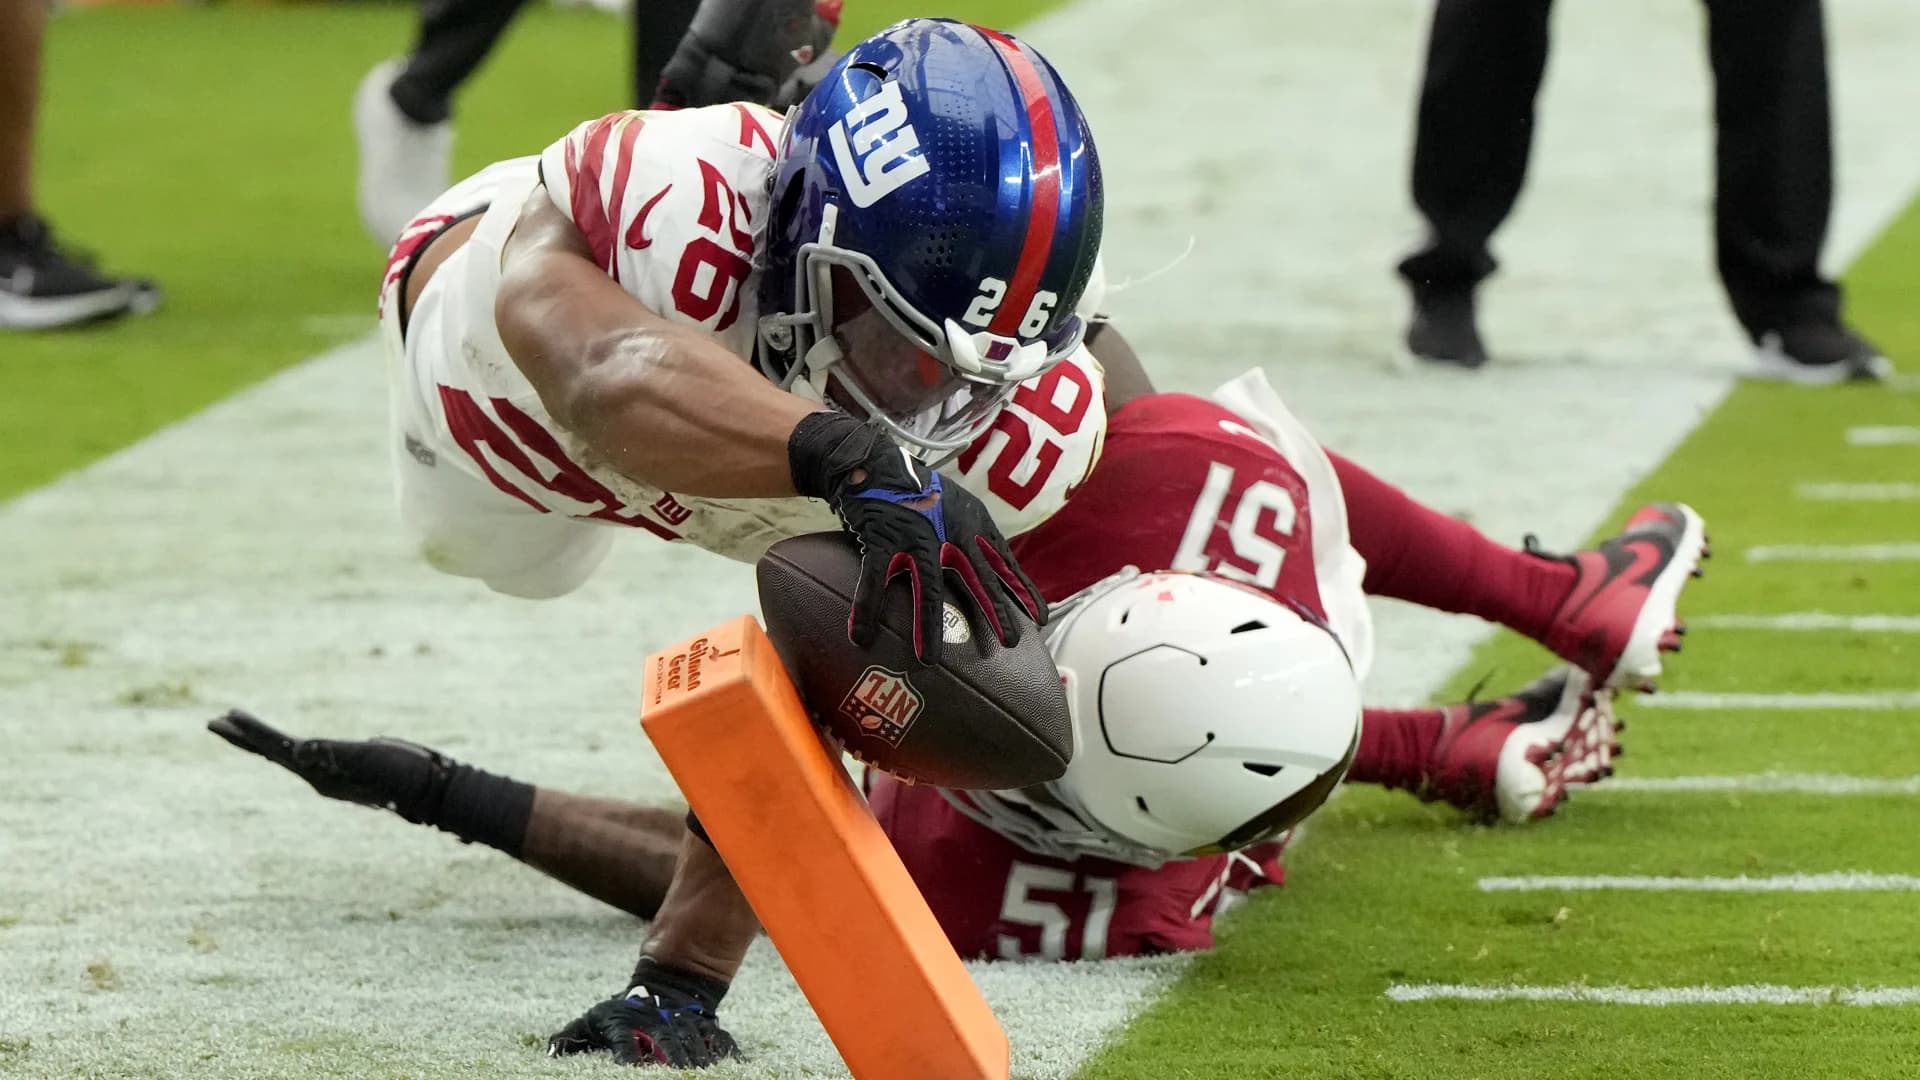 Giants rally from 21-point deficit to beat Cardinals 31-28